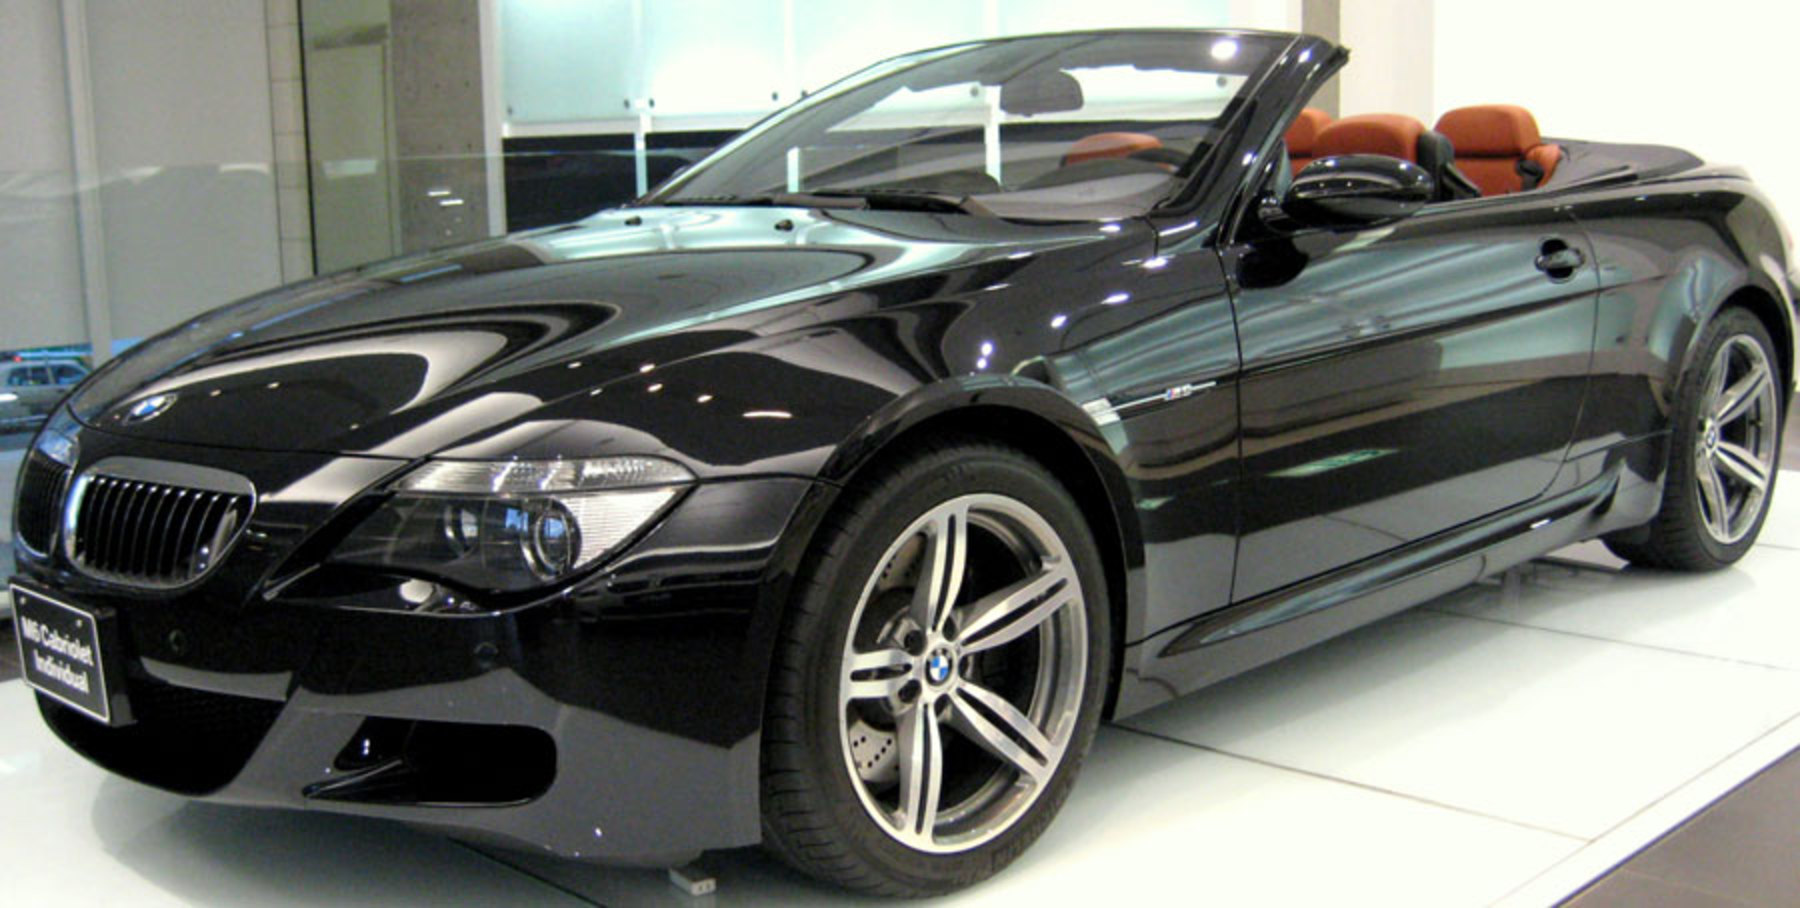 BMW 630i Cabriolet Pictures & Wallpapers - Wallpaper #5 of 6